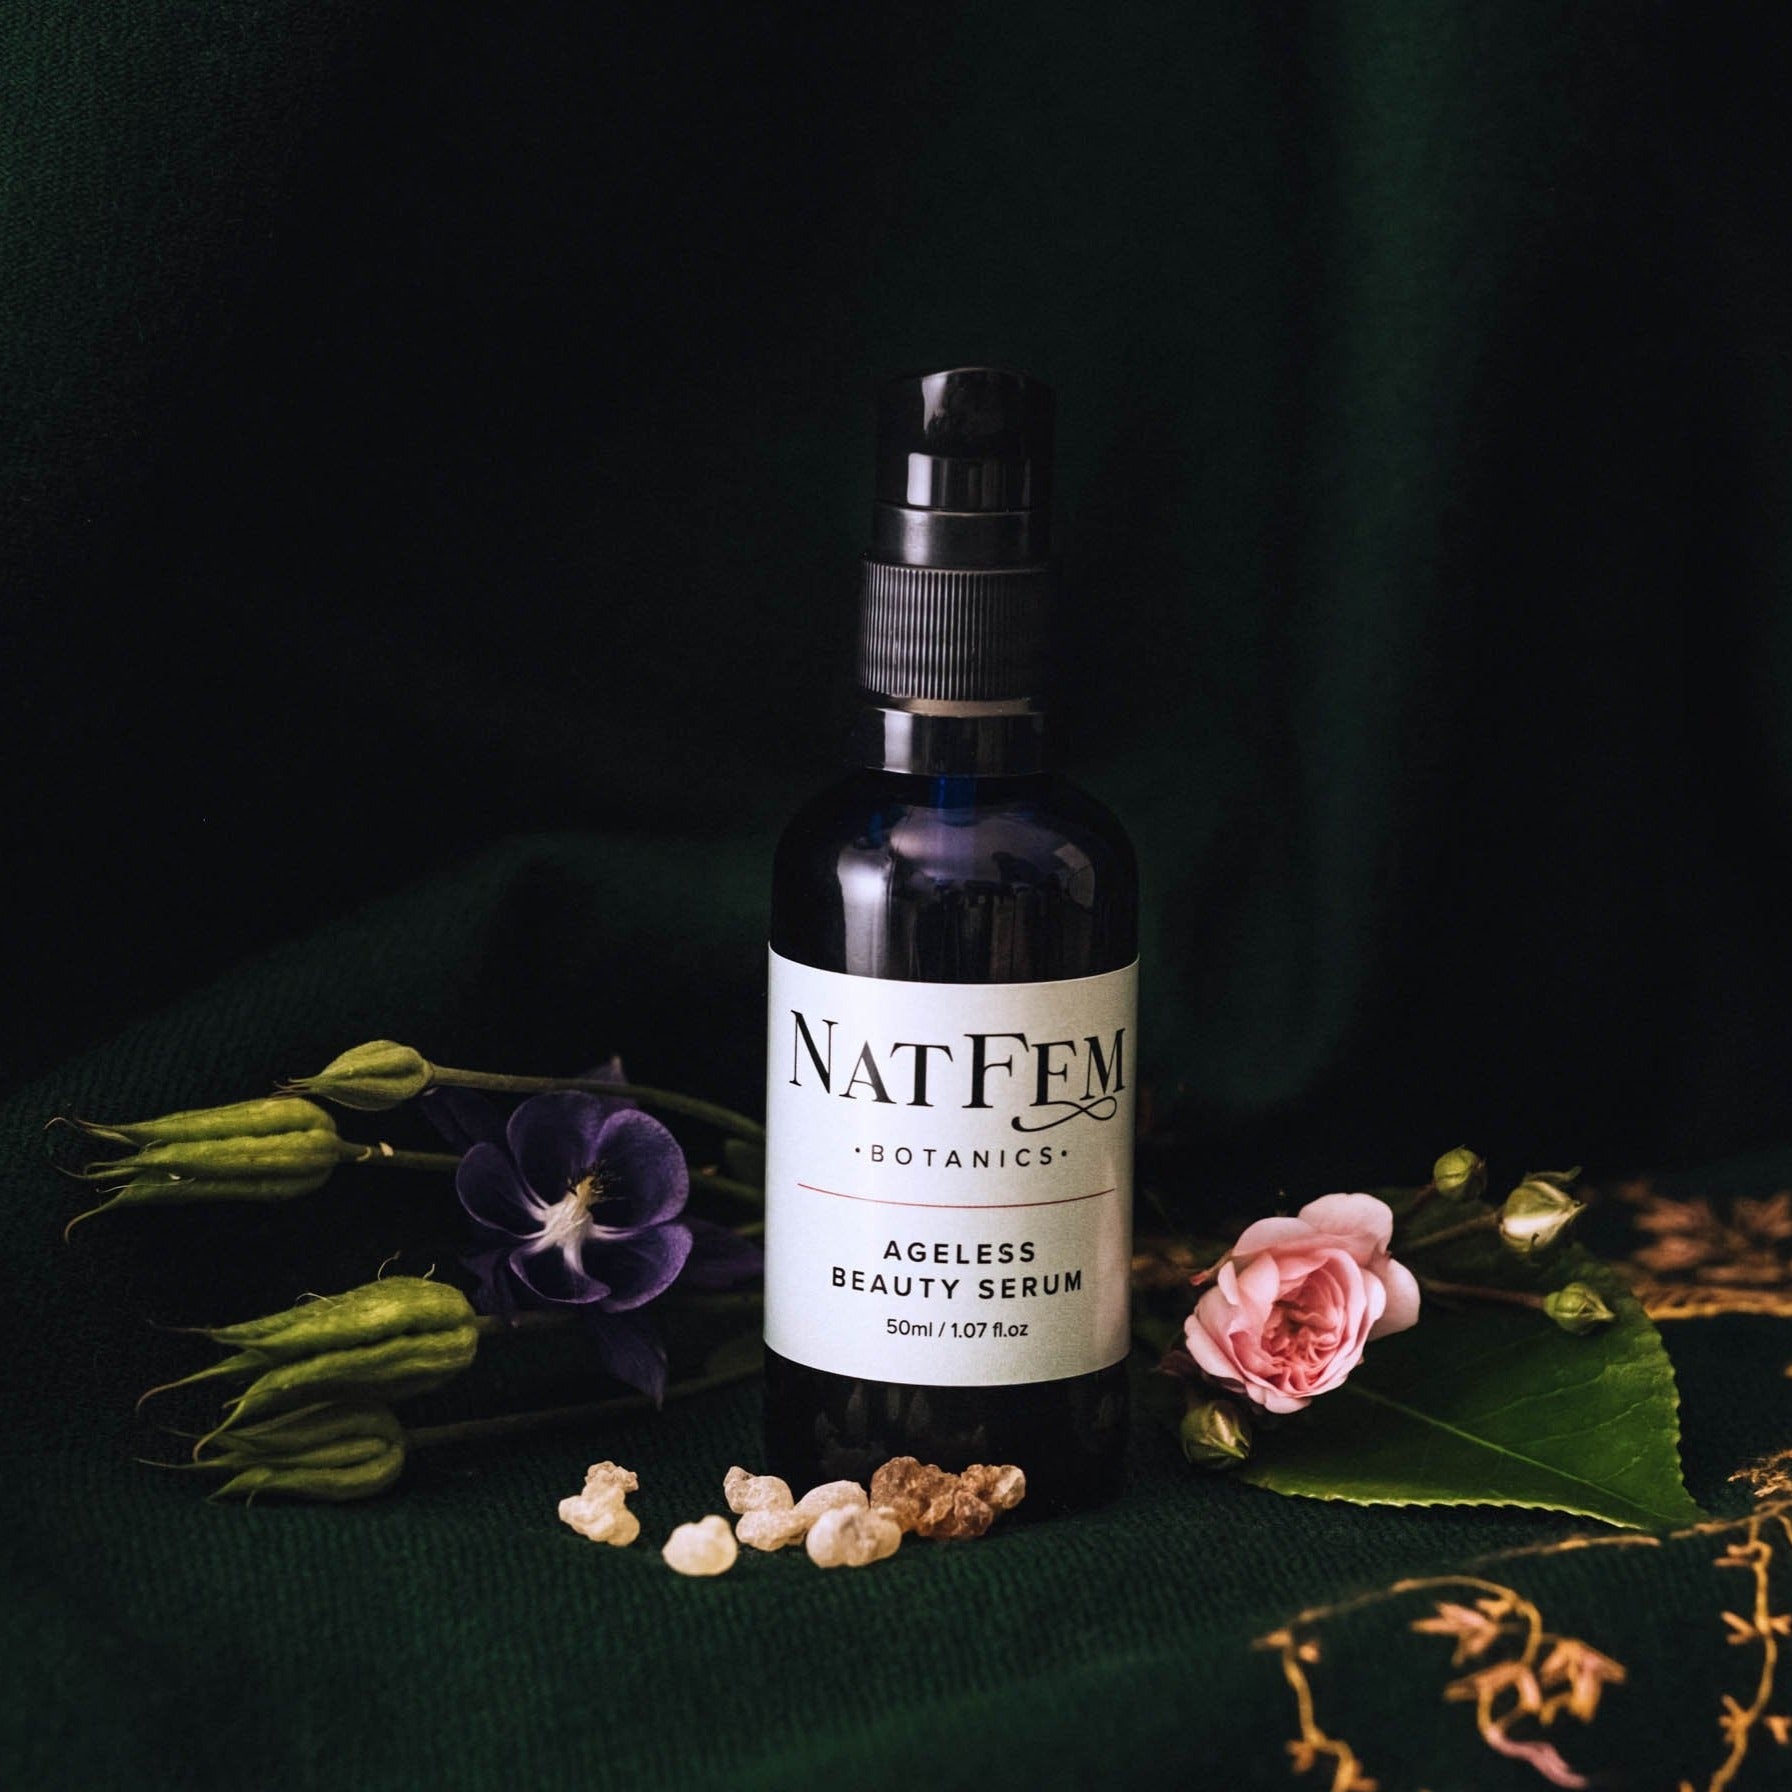 Luxury botanically infused facial serum women and men of all ages